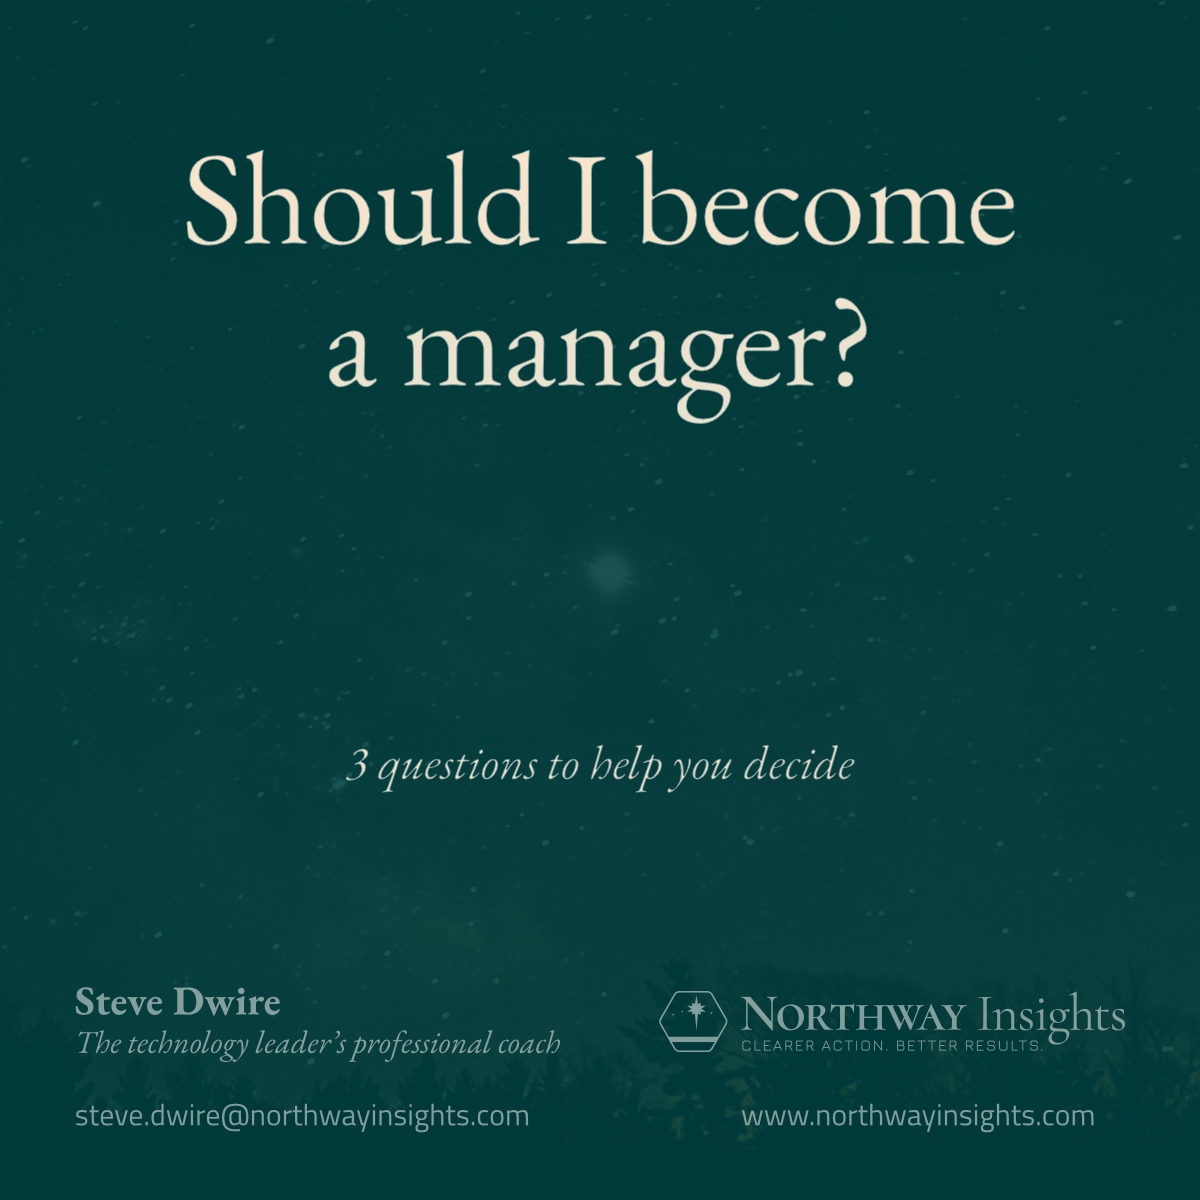 Should I become a manager?